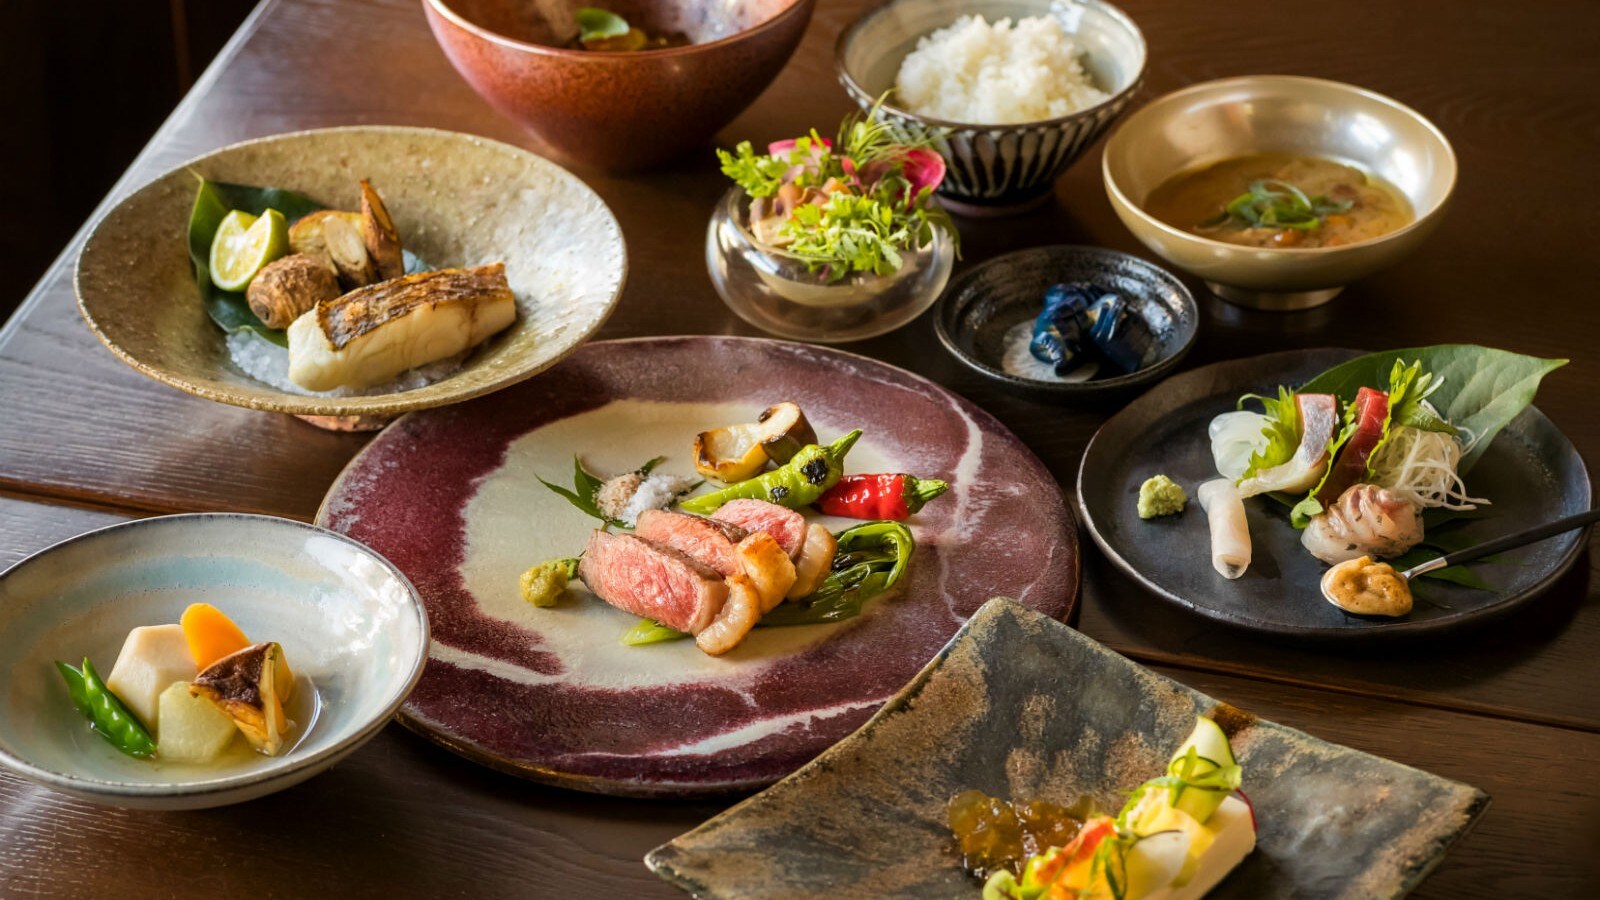 [Meals] Please enjoy the feast of Satoyama, which uses plenty of seasonal ingredients cultivated by local farmers.